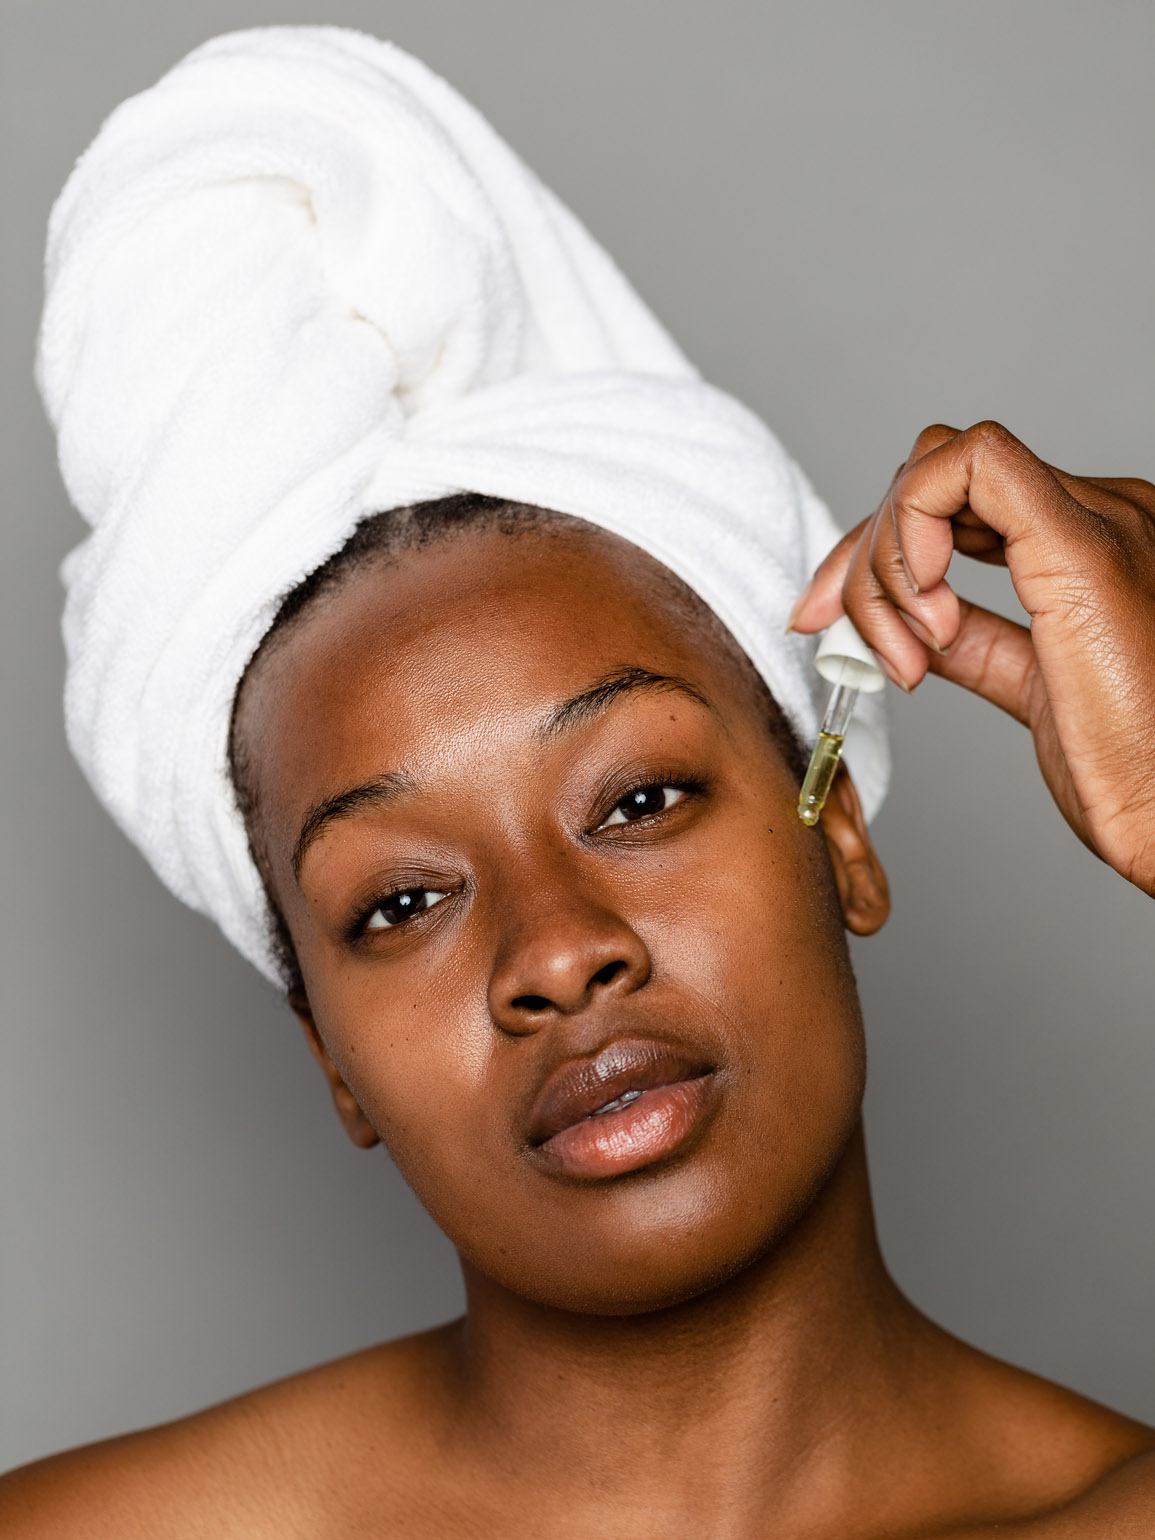 Here's What You Need to Know About Glycolic Acid Peels